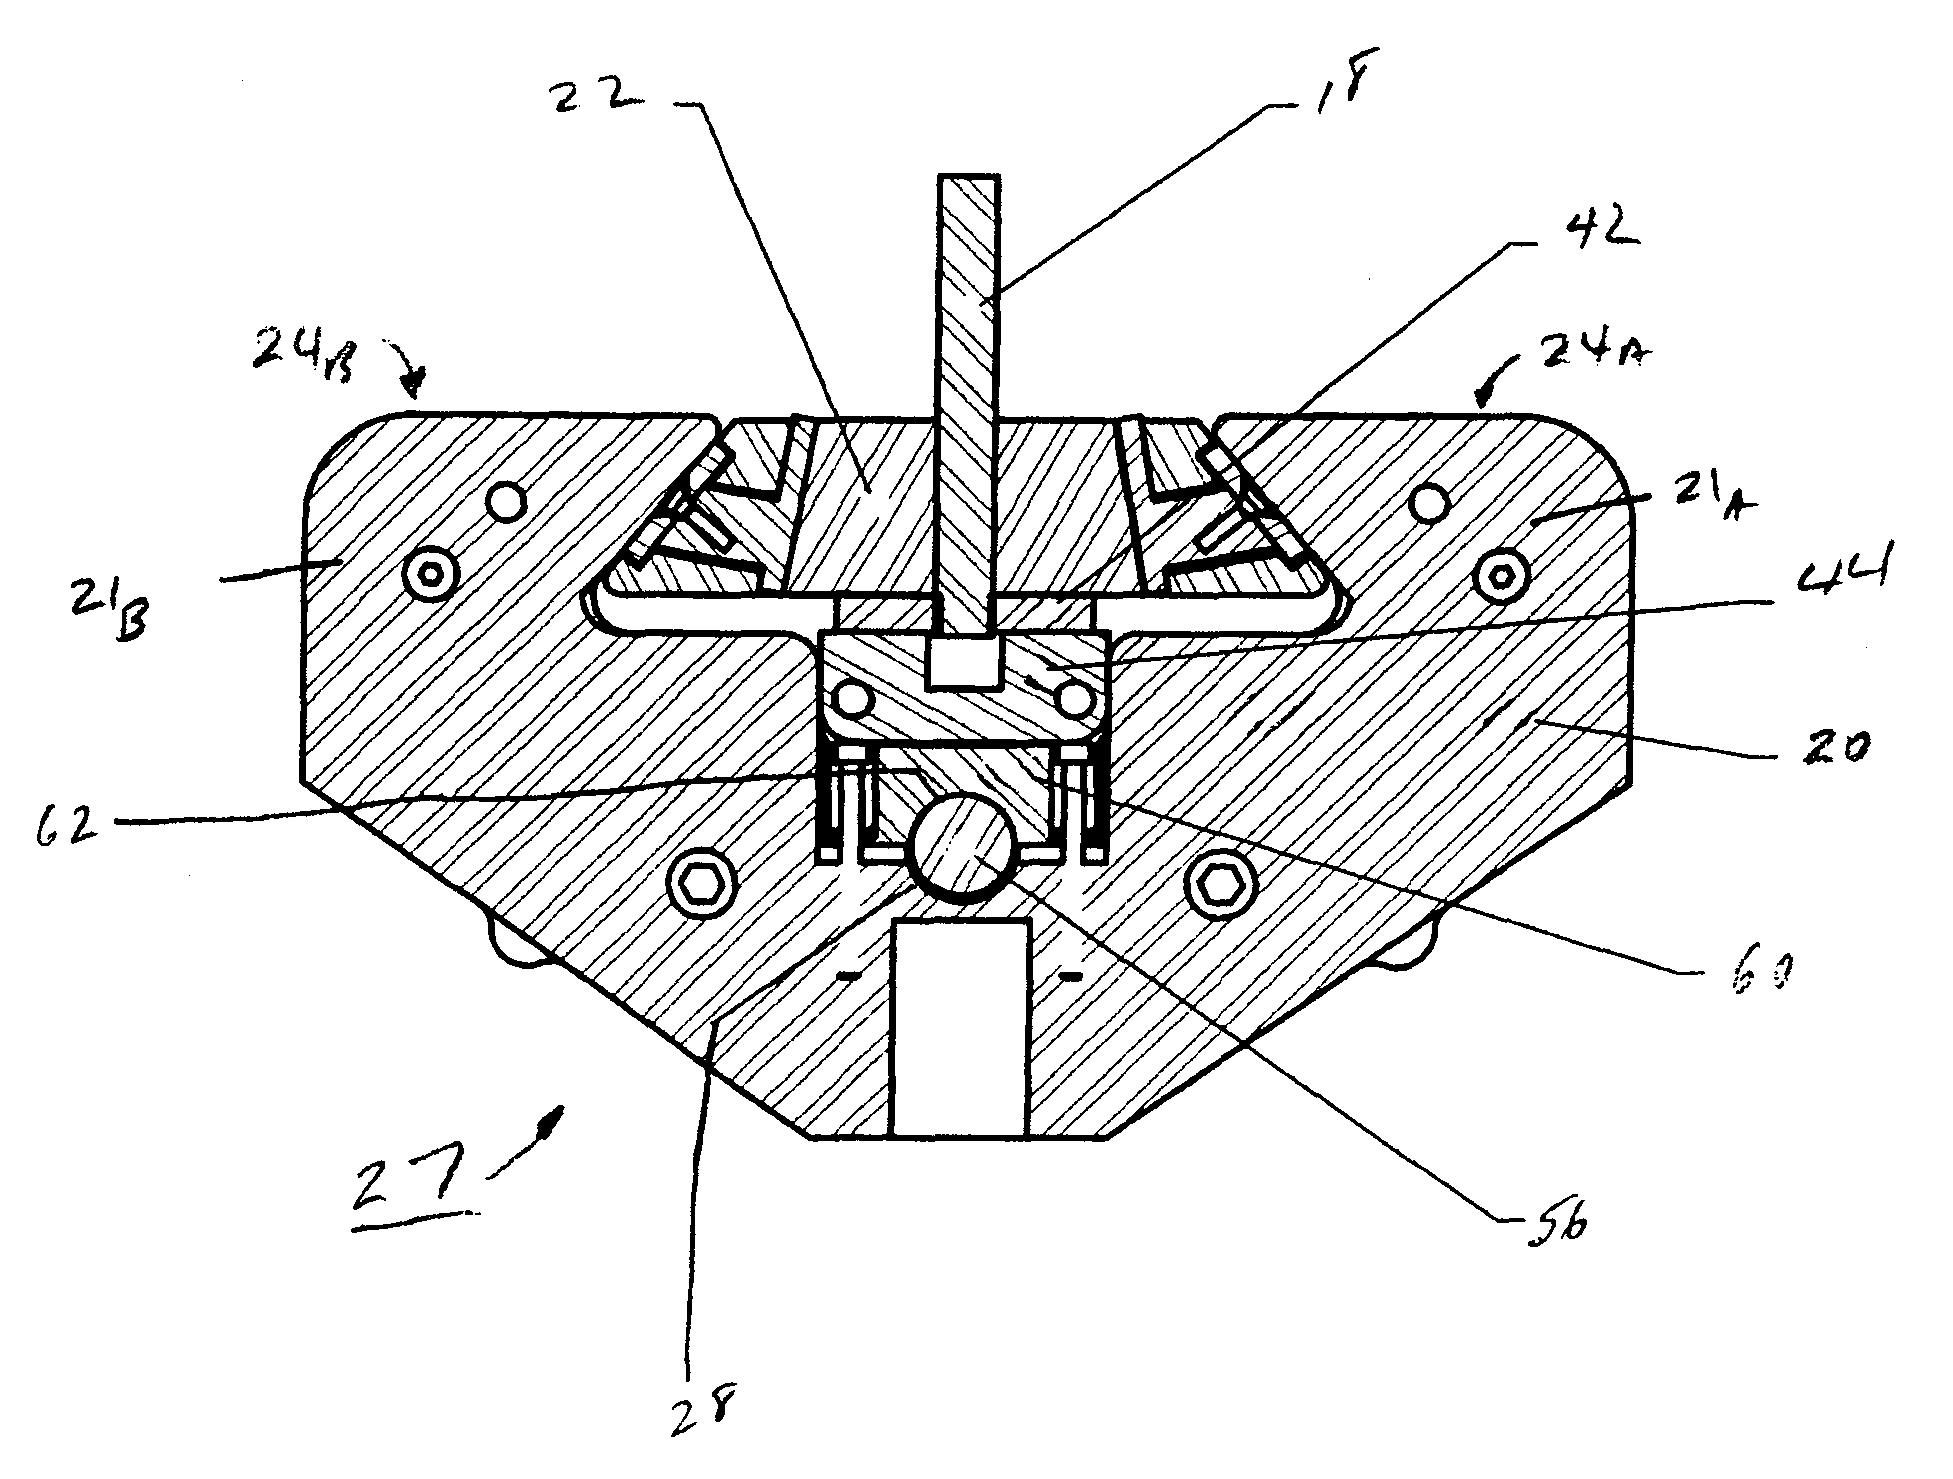 Apparatus for a cam-based jack assembly for use in materials, testing machines and an accompanying method for use therewith